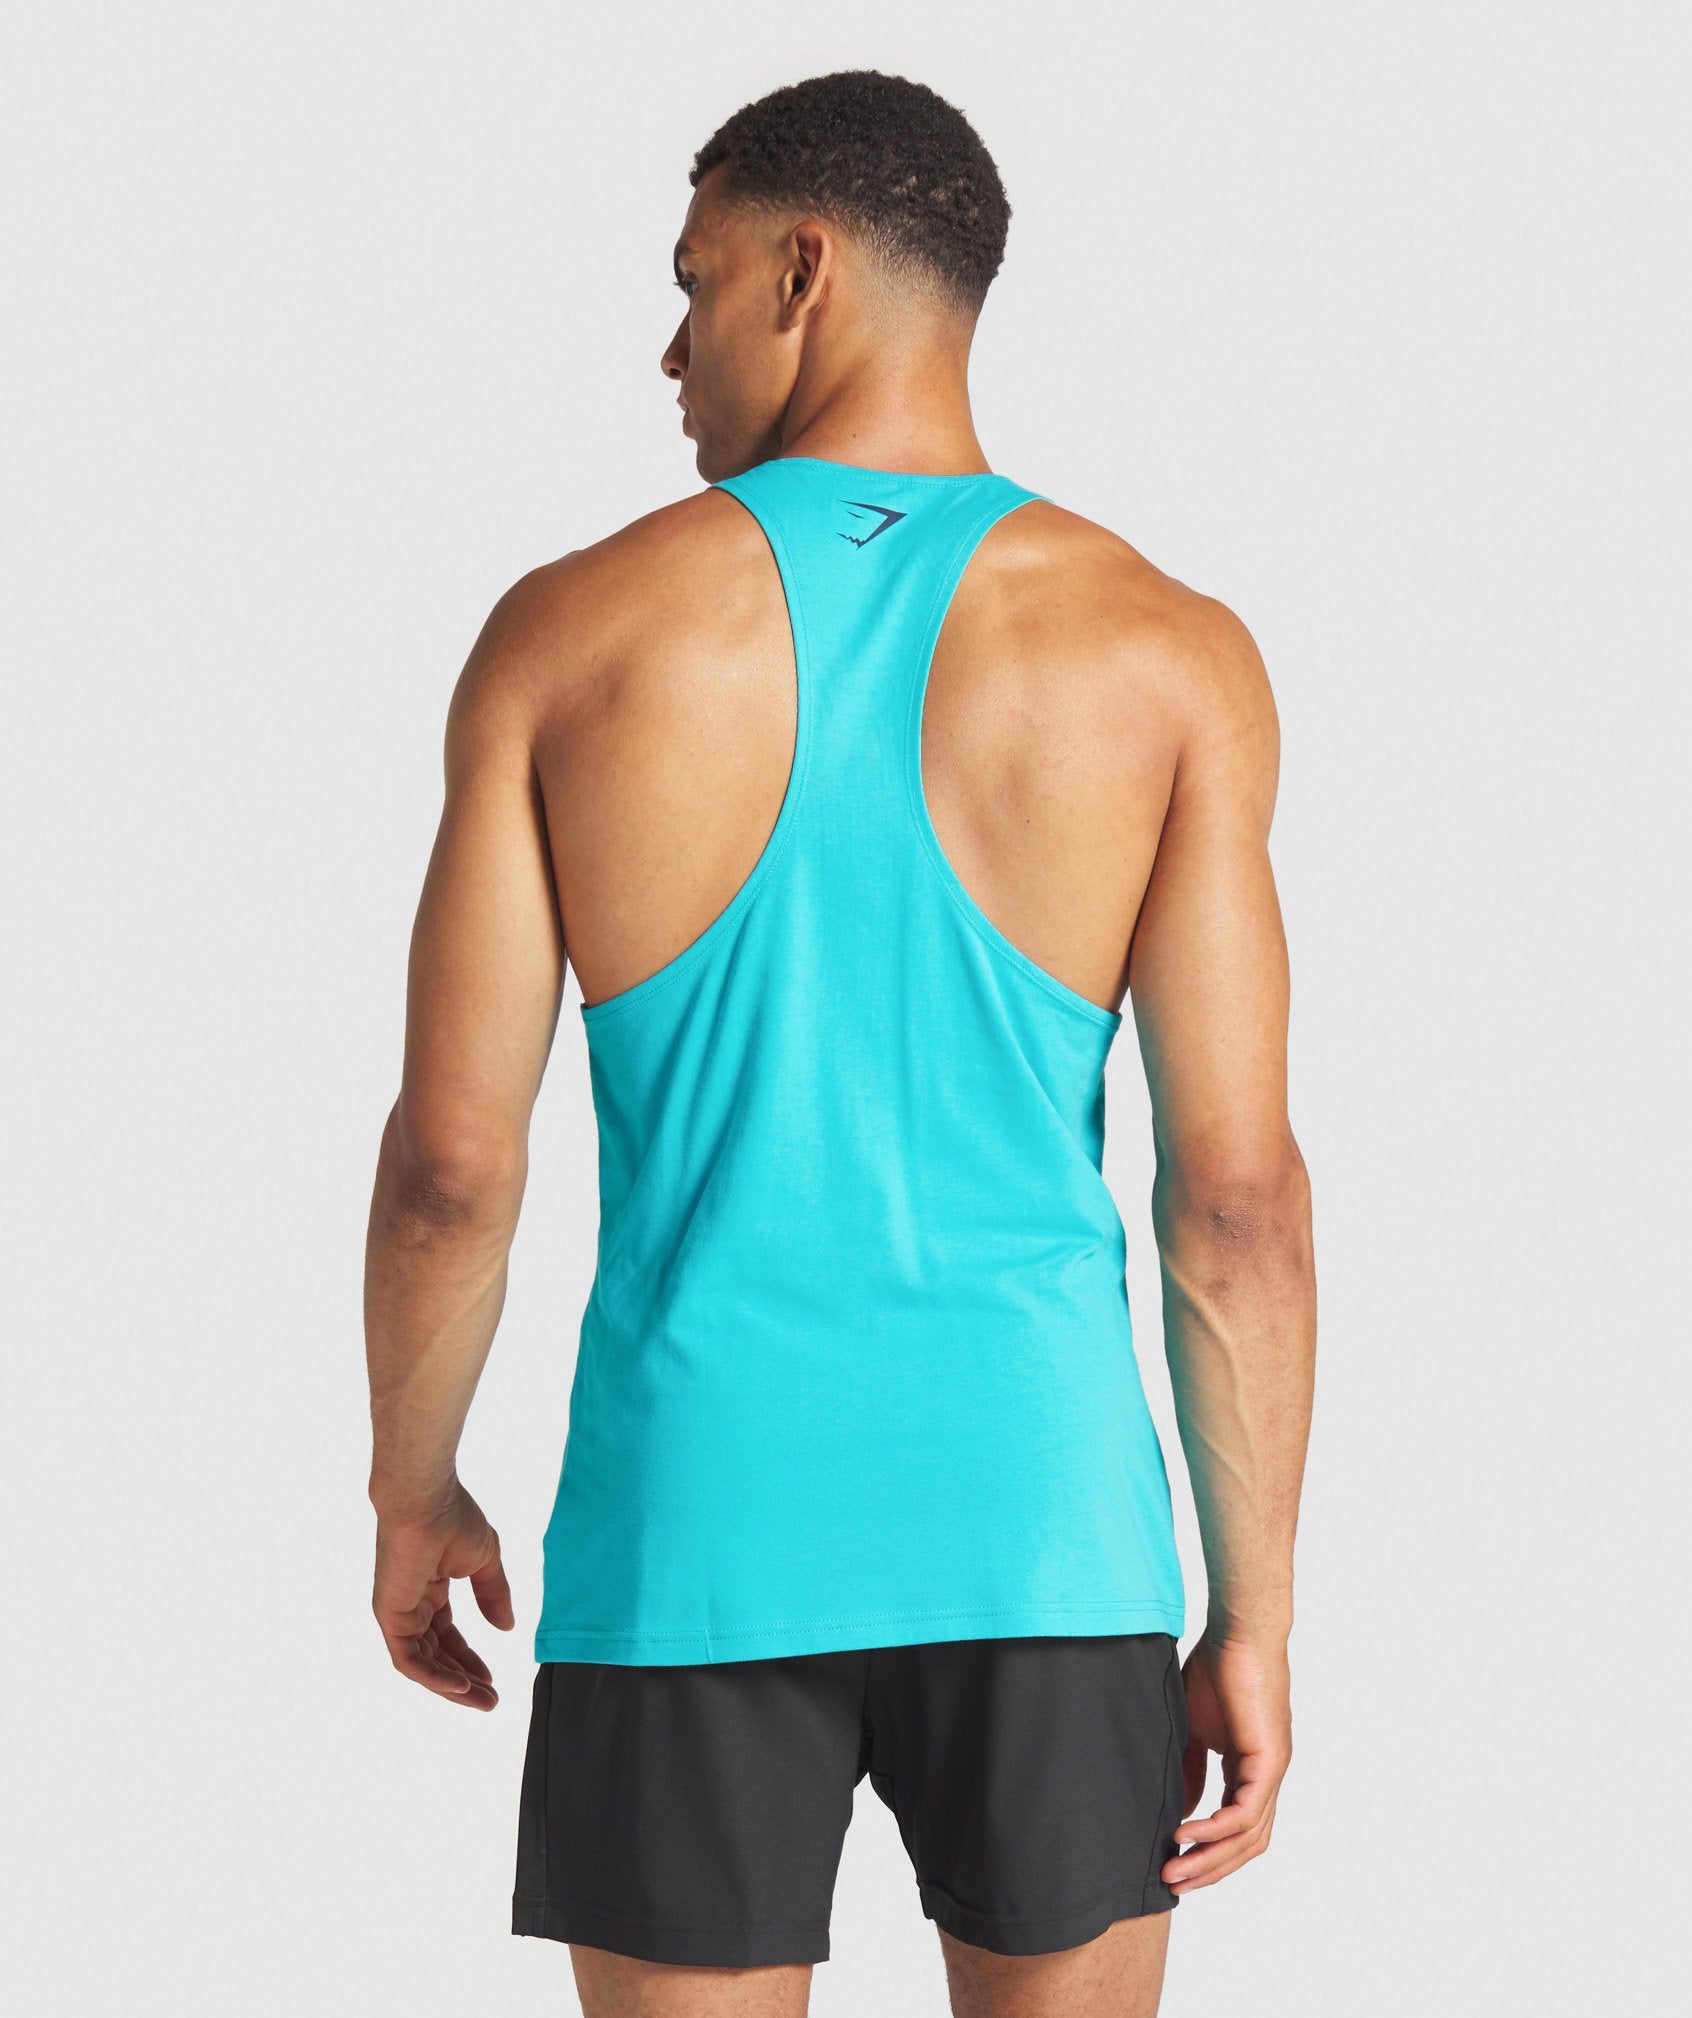 Graphic Geo Fade Stringer in Teal - view 2